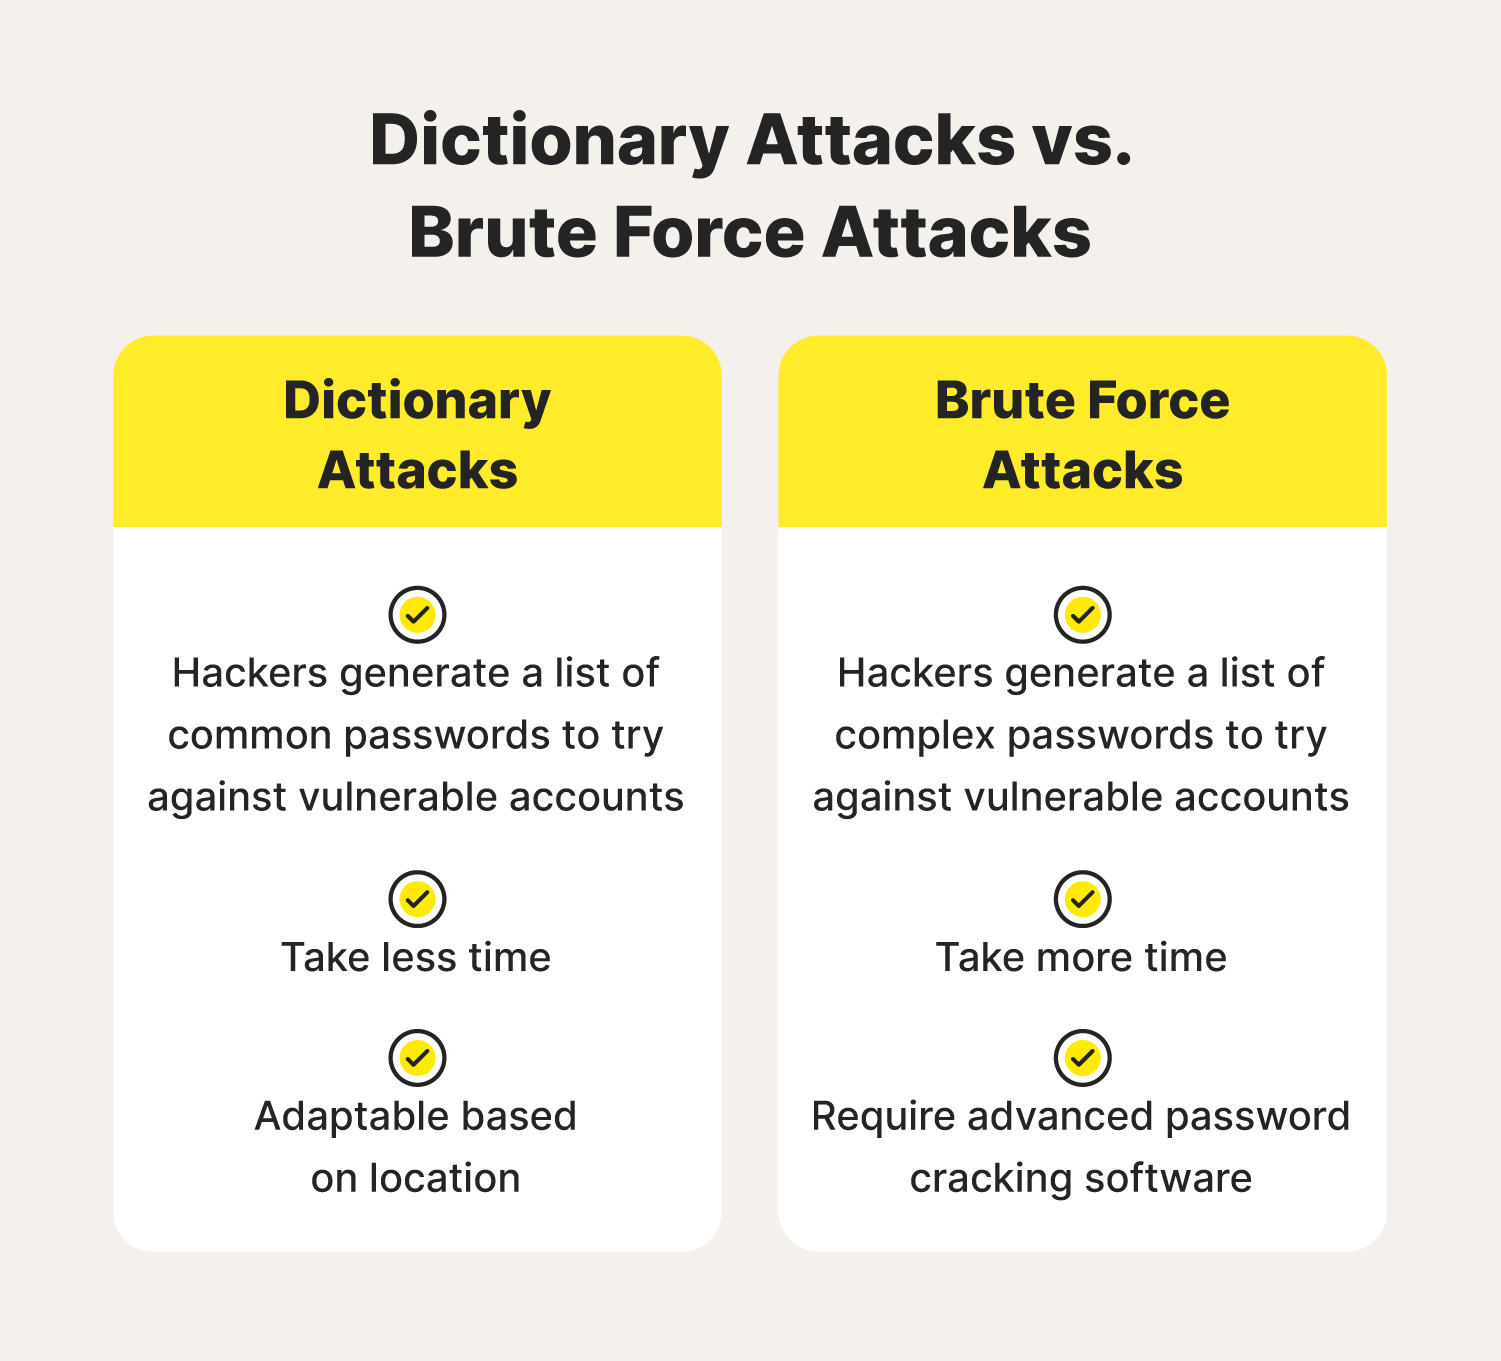 A comparison chart helps distinguish the differences between a dictionary attack vs. brute force attack. 